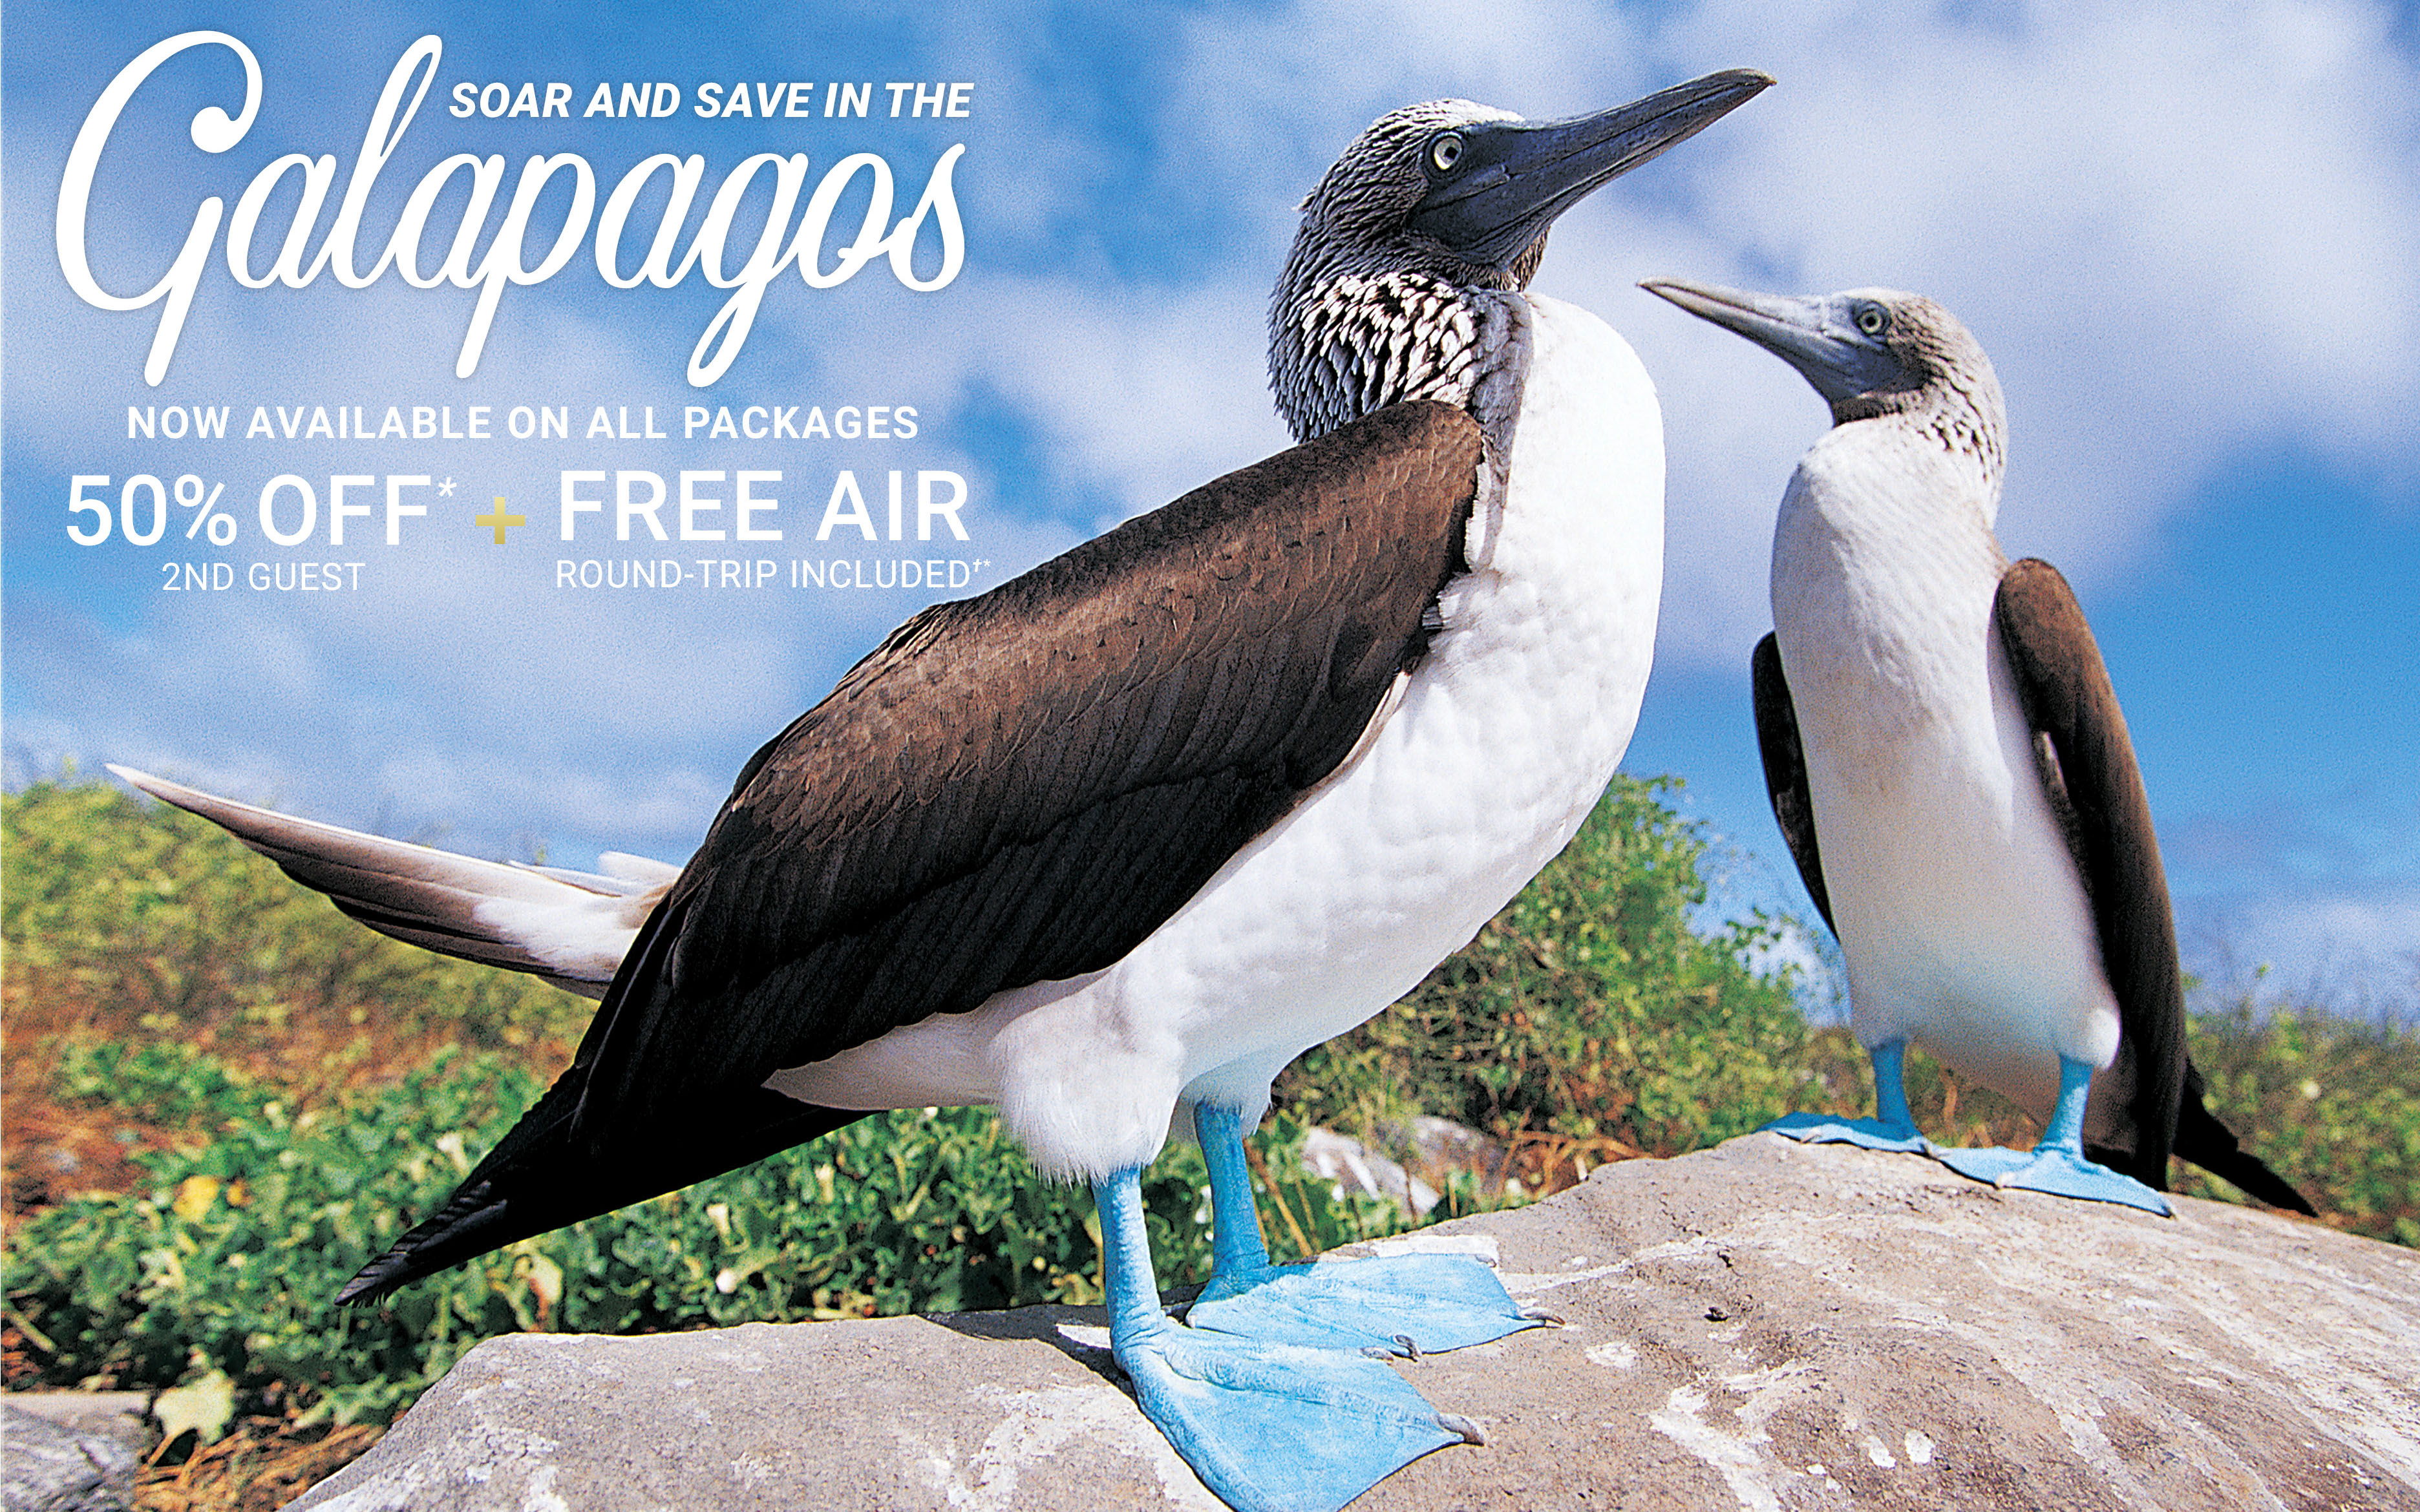 Soar and Save in the Galapagos with Celebrity Cruises